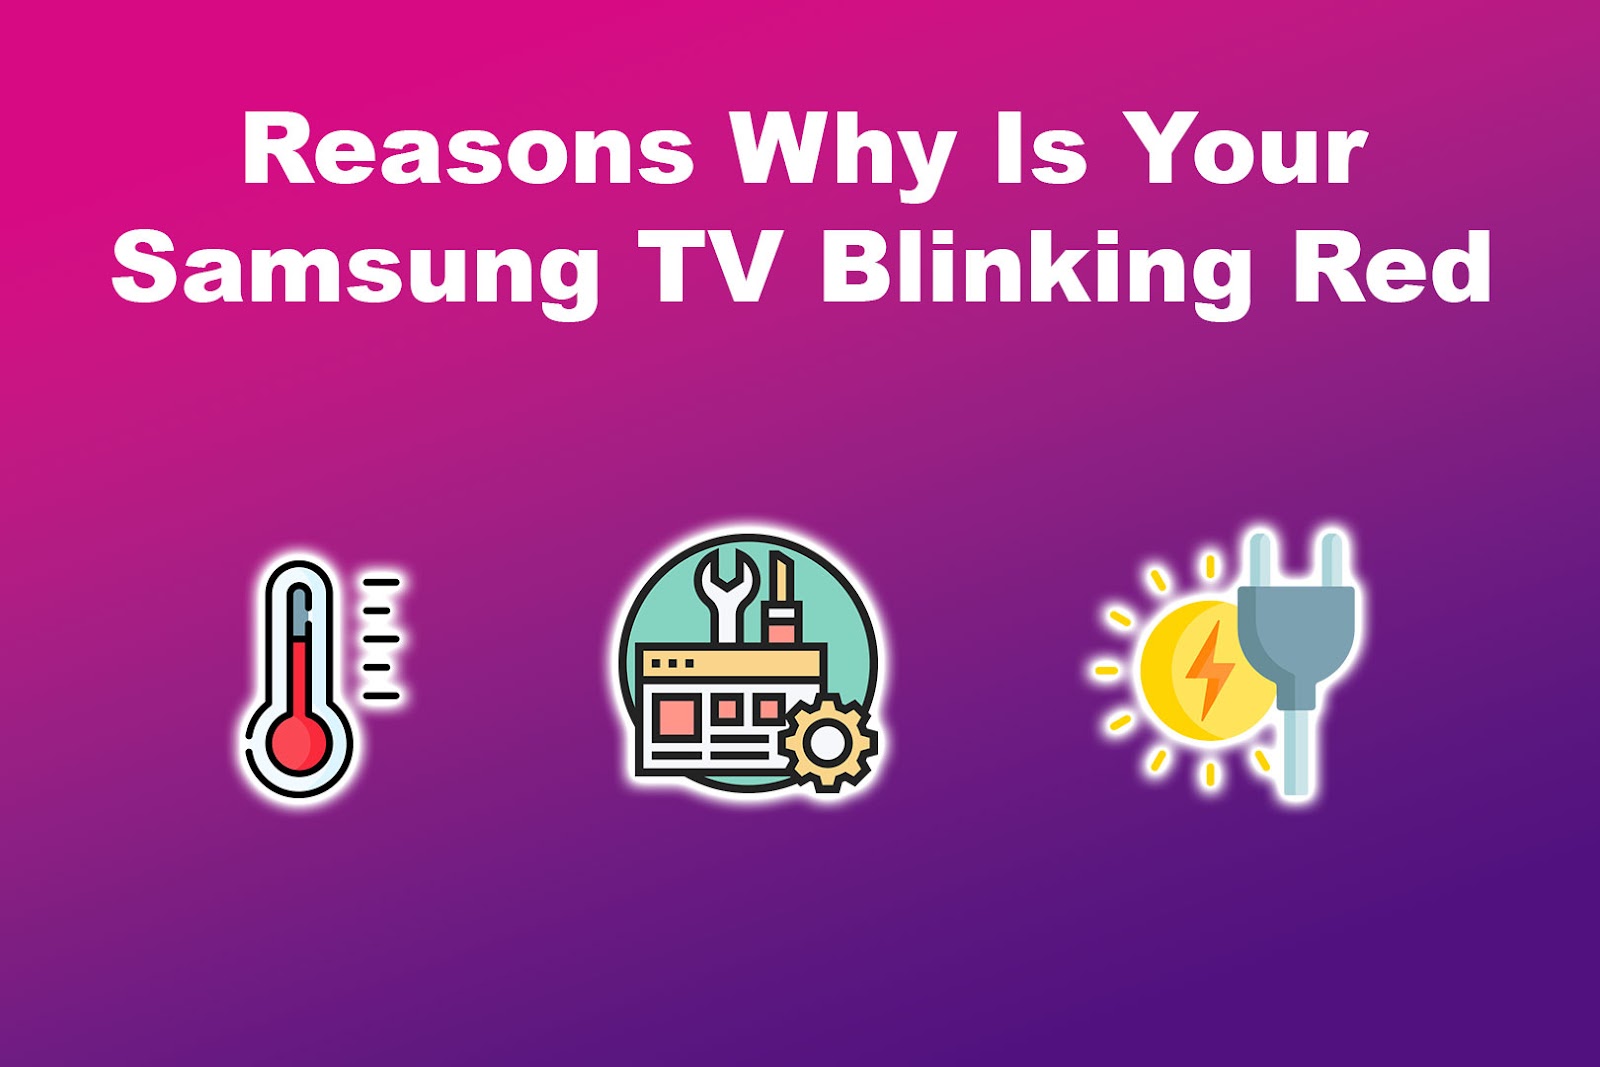 Why Is Your Samsung TV Blinking Red